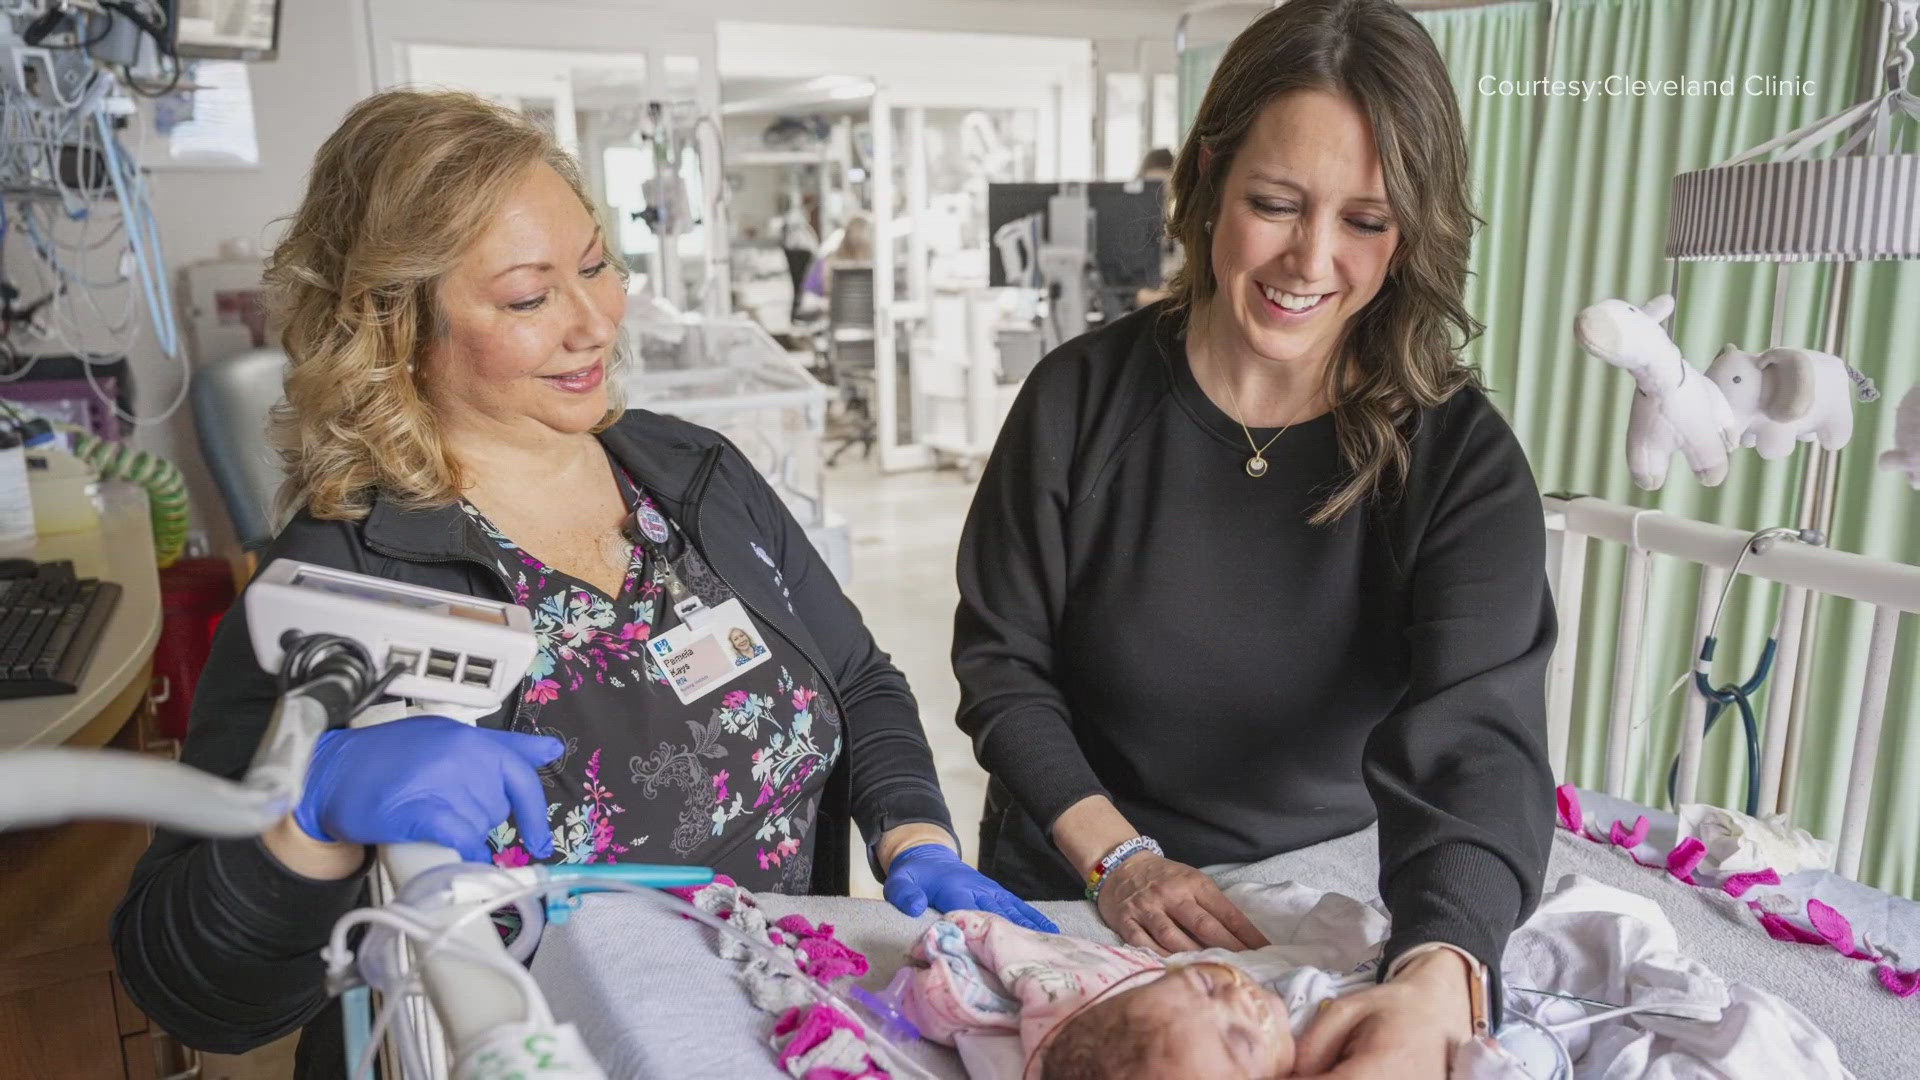 3News' Lindsay Buckingham shares the incredible story of two Cleveland Clinic healthcare workers who share a life — and near-death — connection.